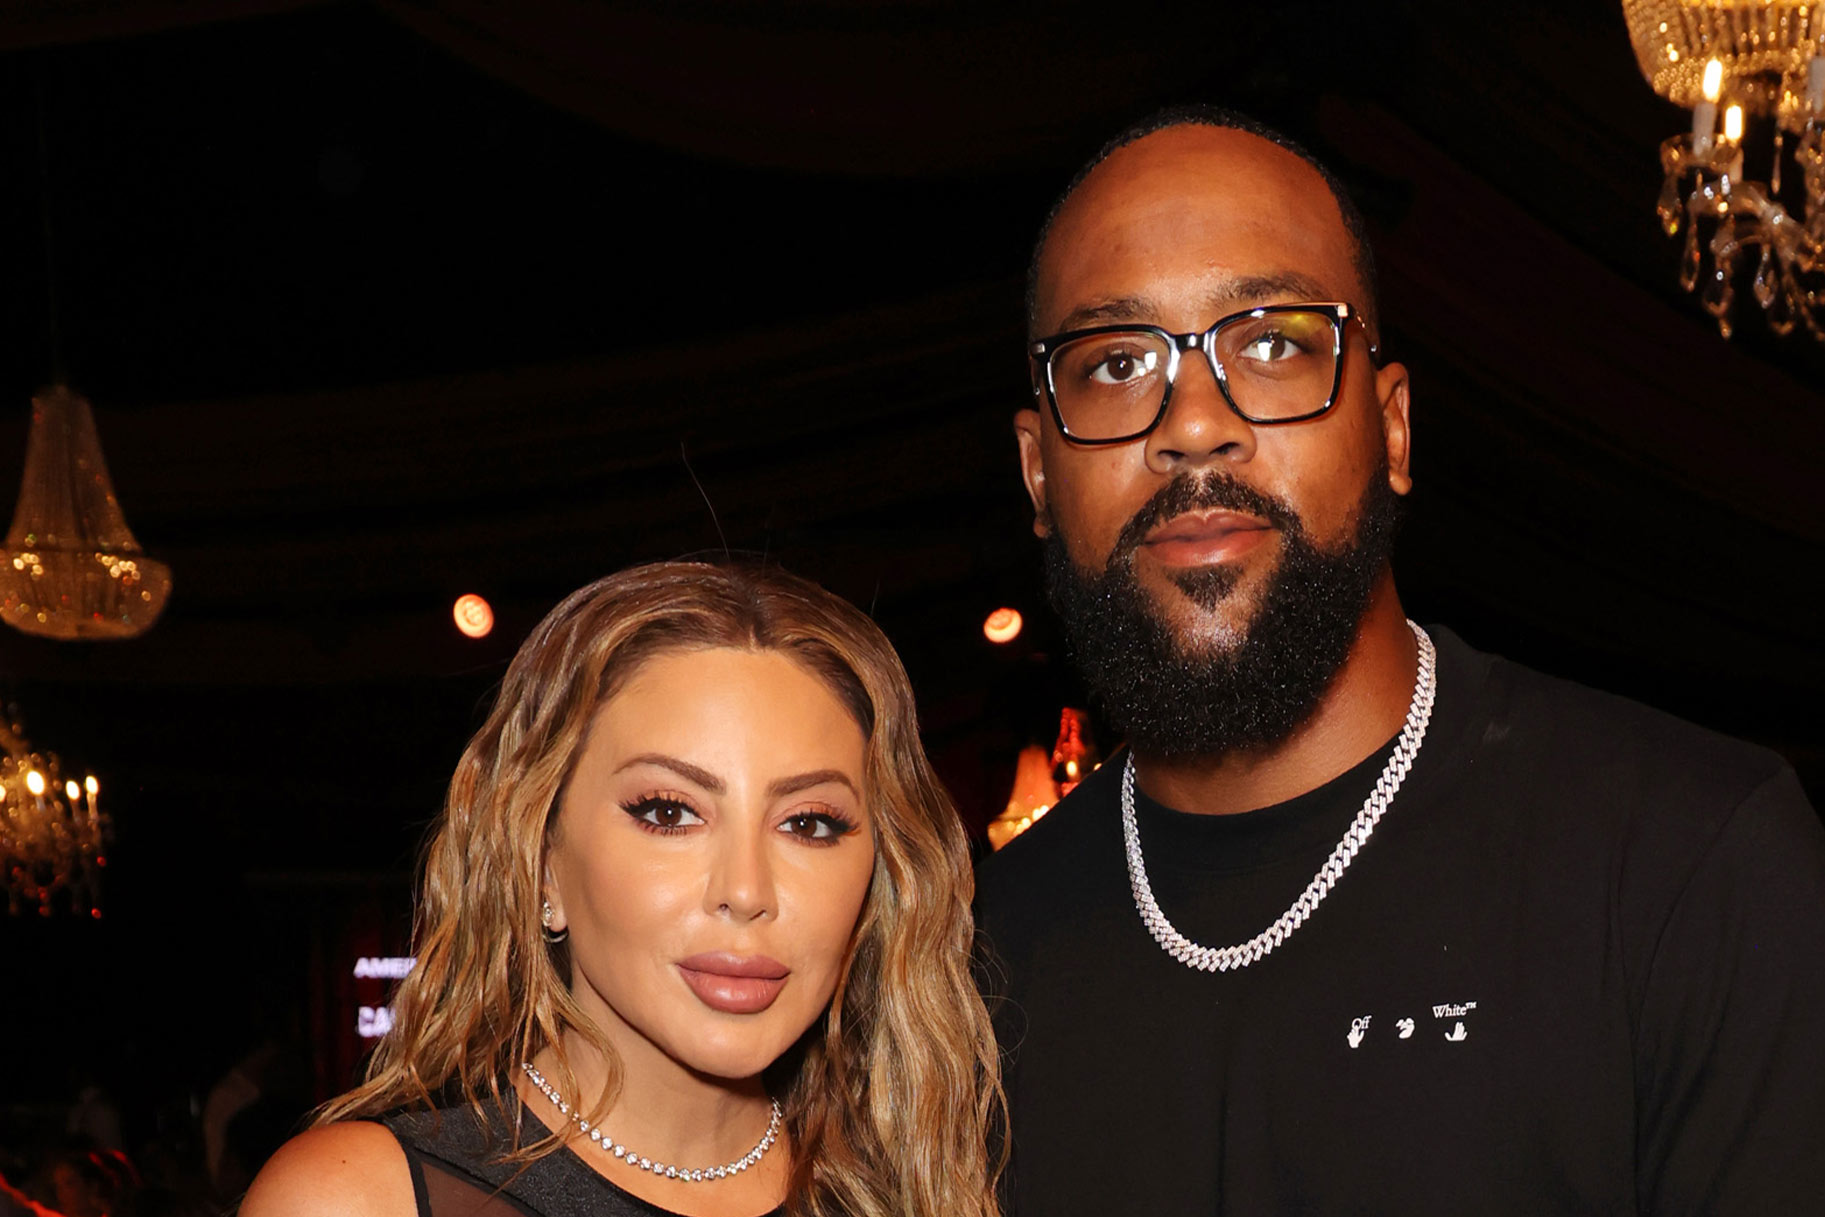 Larsa Pippen: What Marcus Jordan’s family thinks about relationship